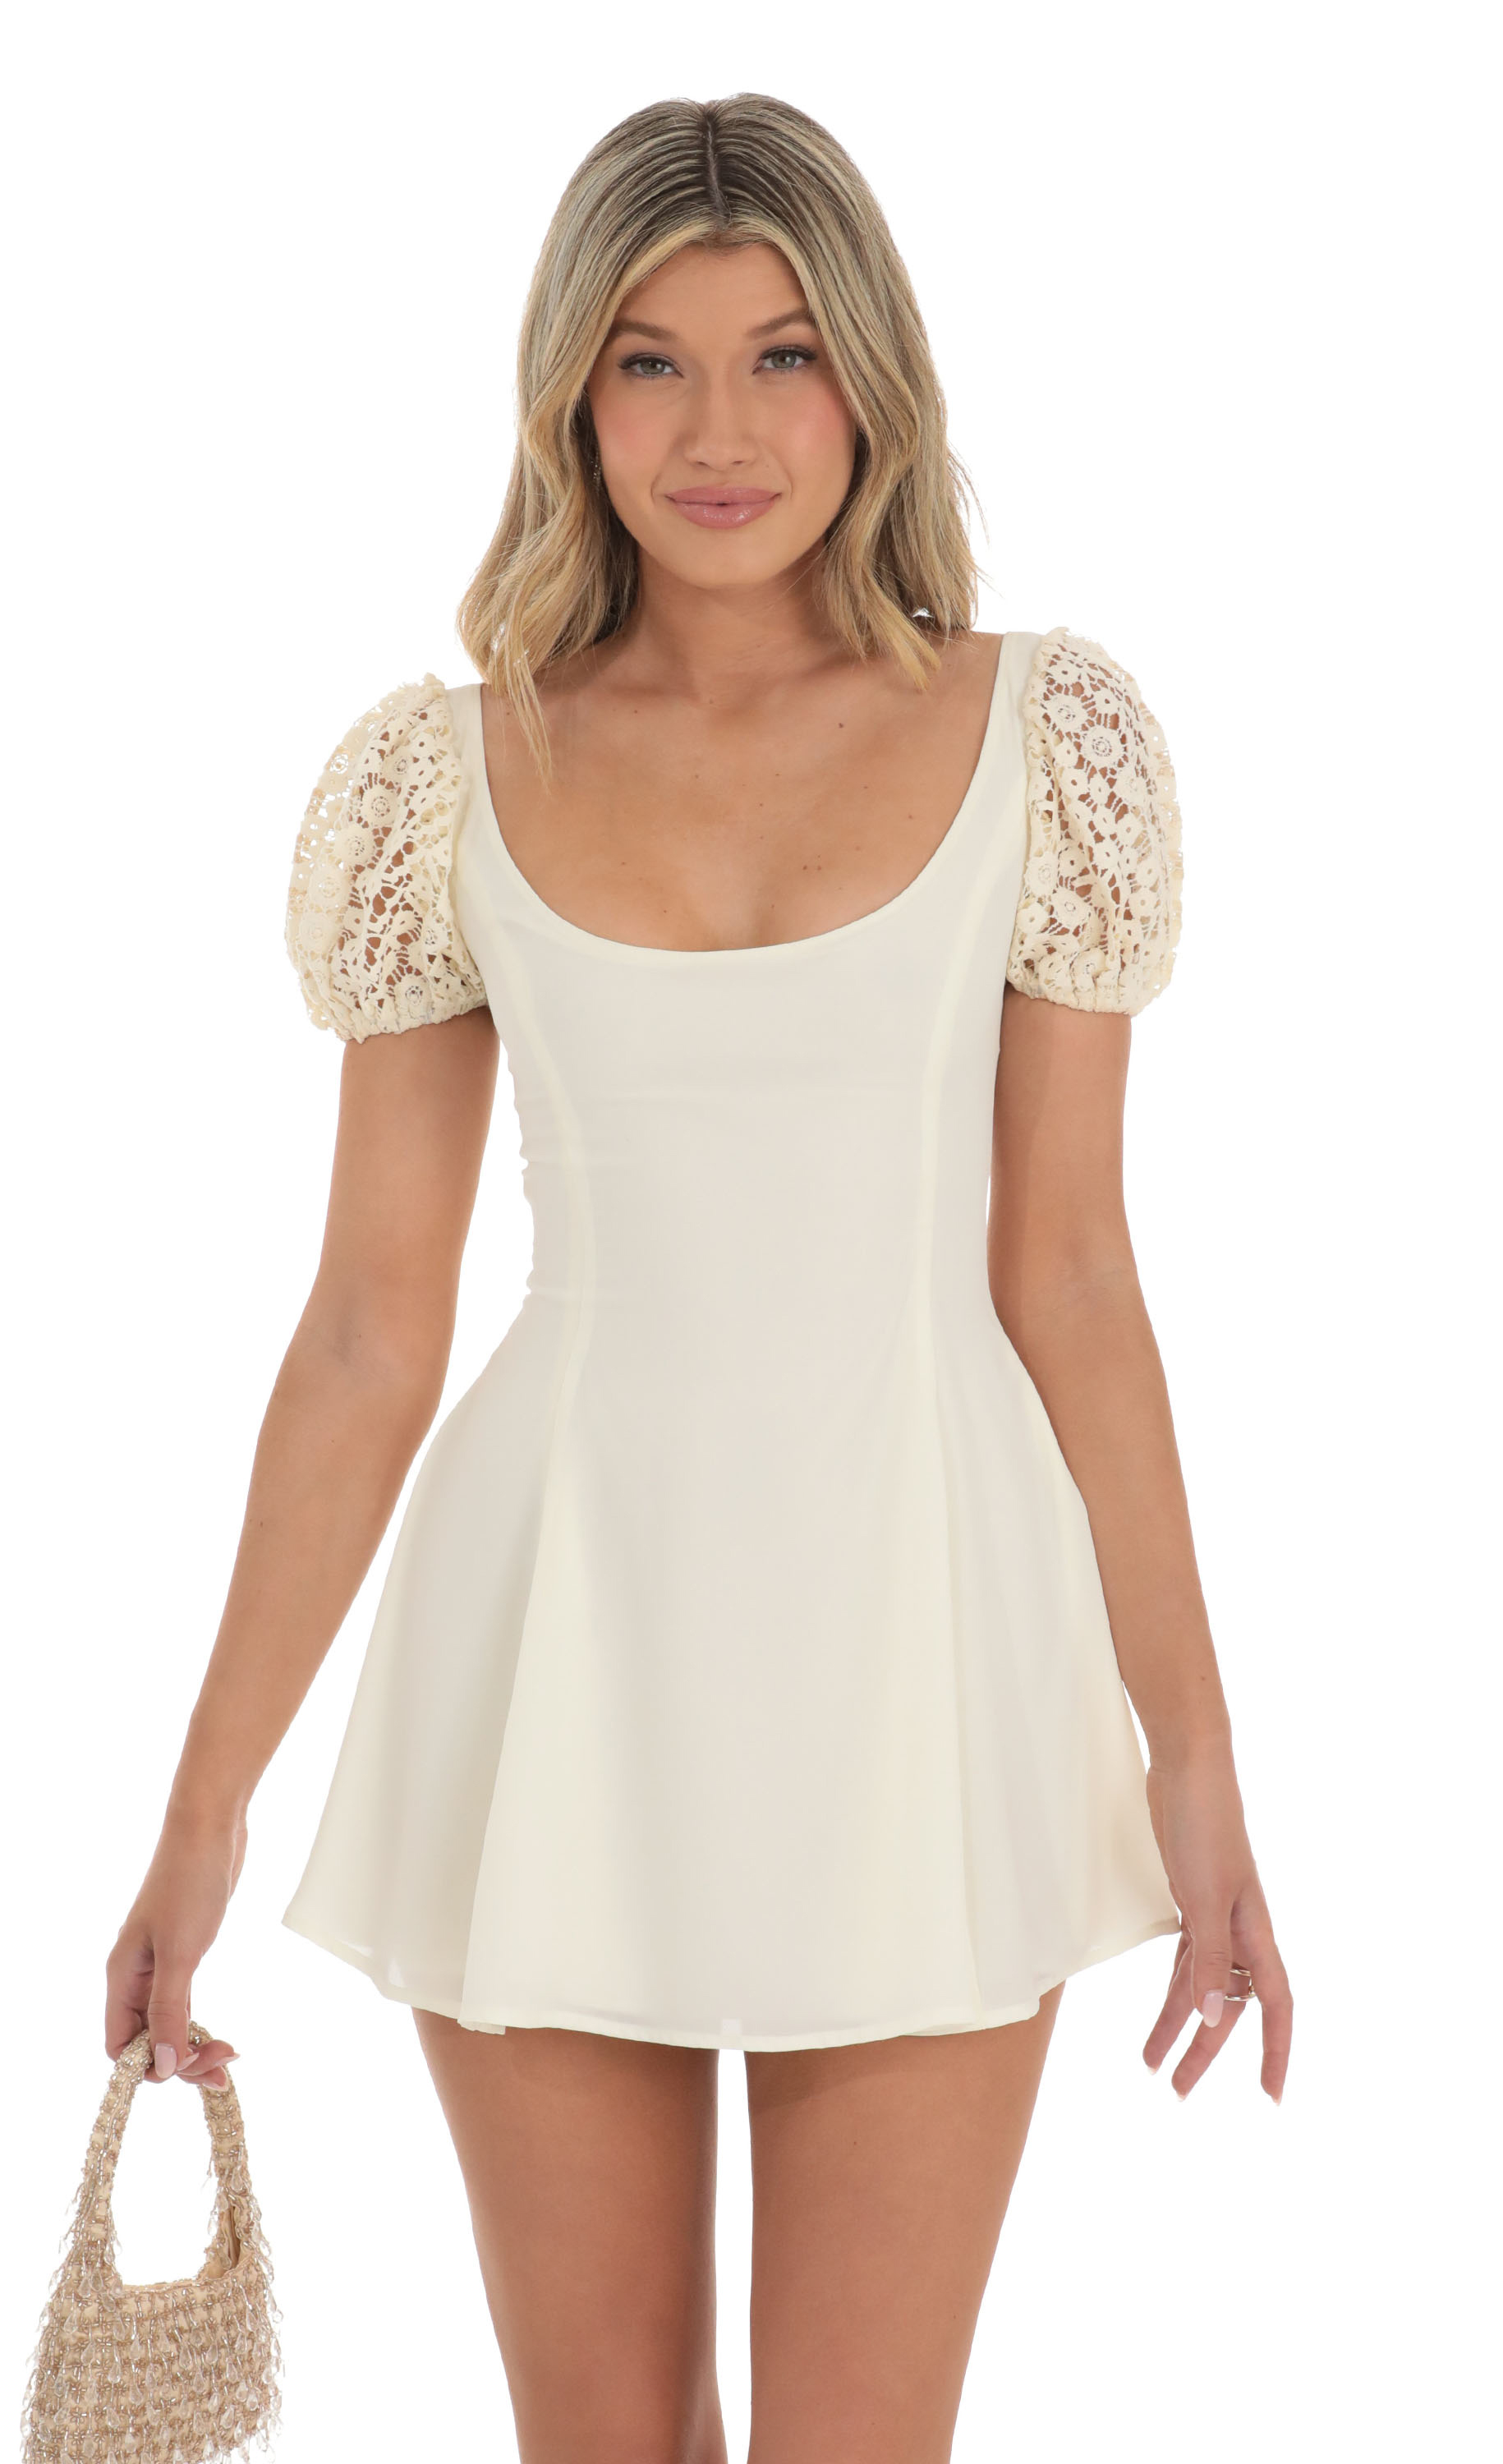 Puff Sleeve Dress in Cream with Crochet Sleeves